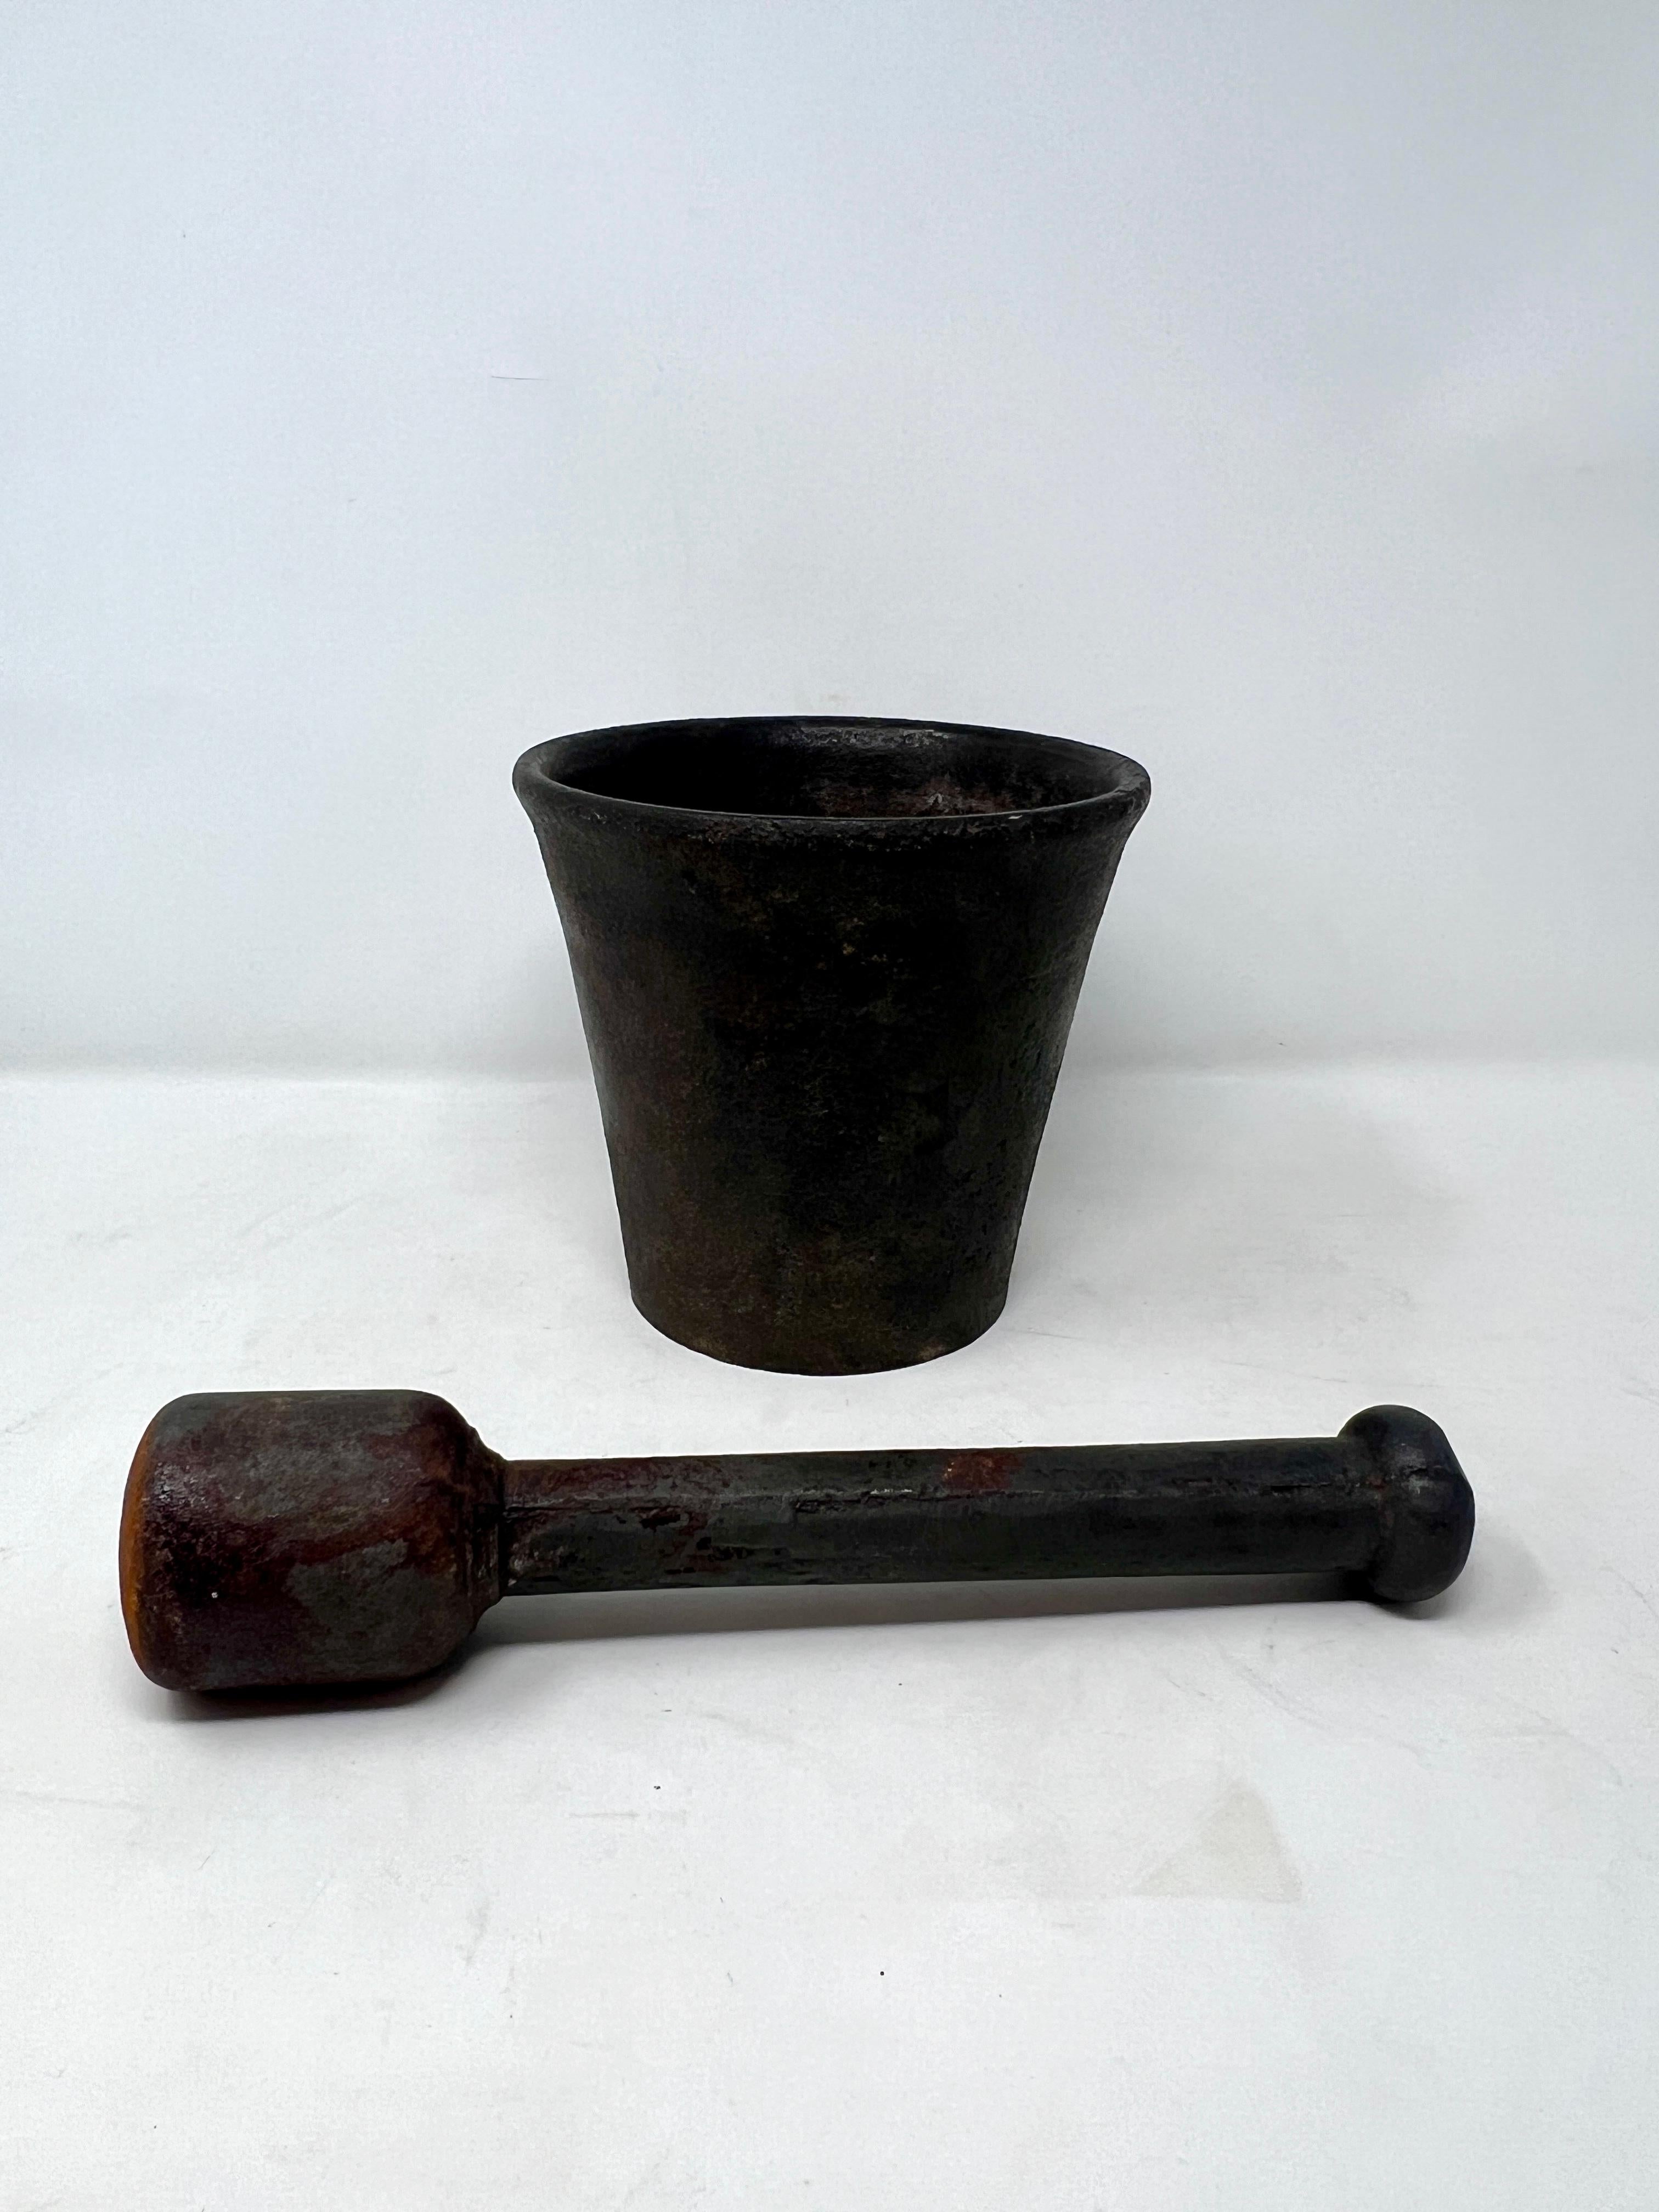 Large Estate Solid Iron Mortar And Pestle, Circa 1930's-1940's.  Very heavy and substantial piece.
Mortar
	H = 10.25 inches
	Dia = 6.5 inches
Pestle
	H = 10.25 inches
	Dia = 2 inches